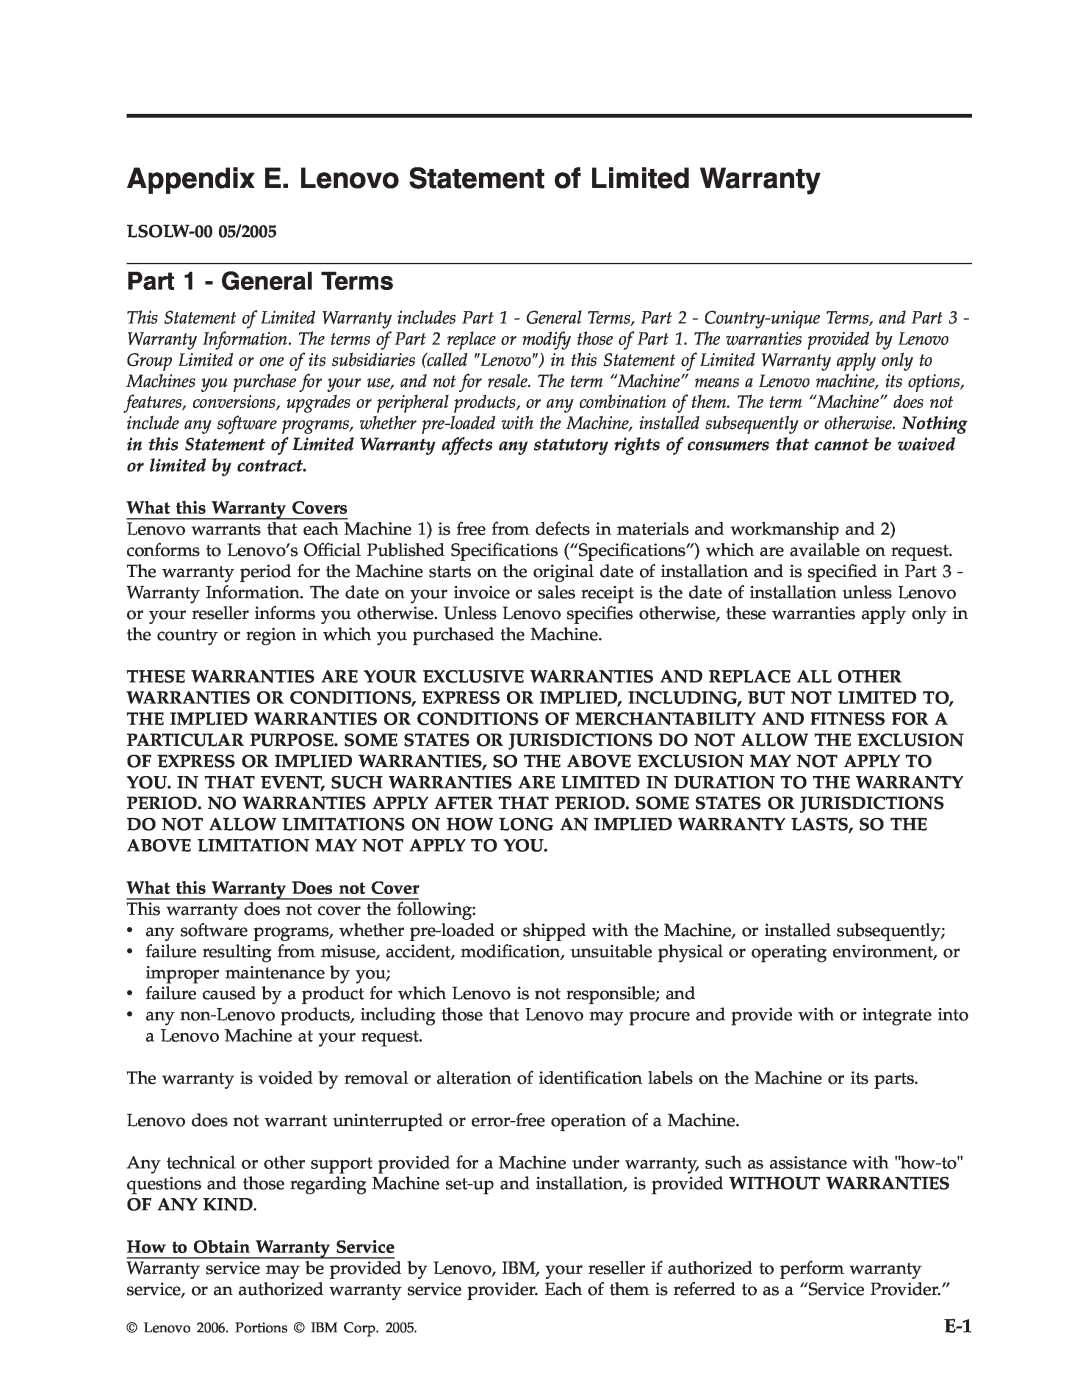 Lenovo 41N5583 manual Appendix E. Lenovo Statement of Limited Warranty, Part 1 - General Terms, LSOLW-0005/2005 